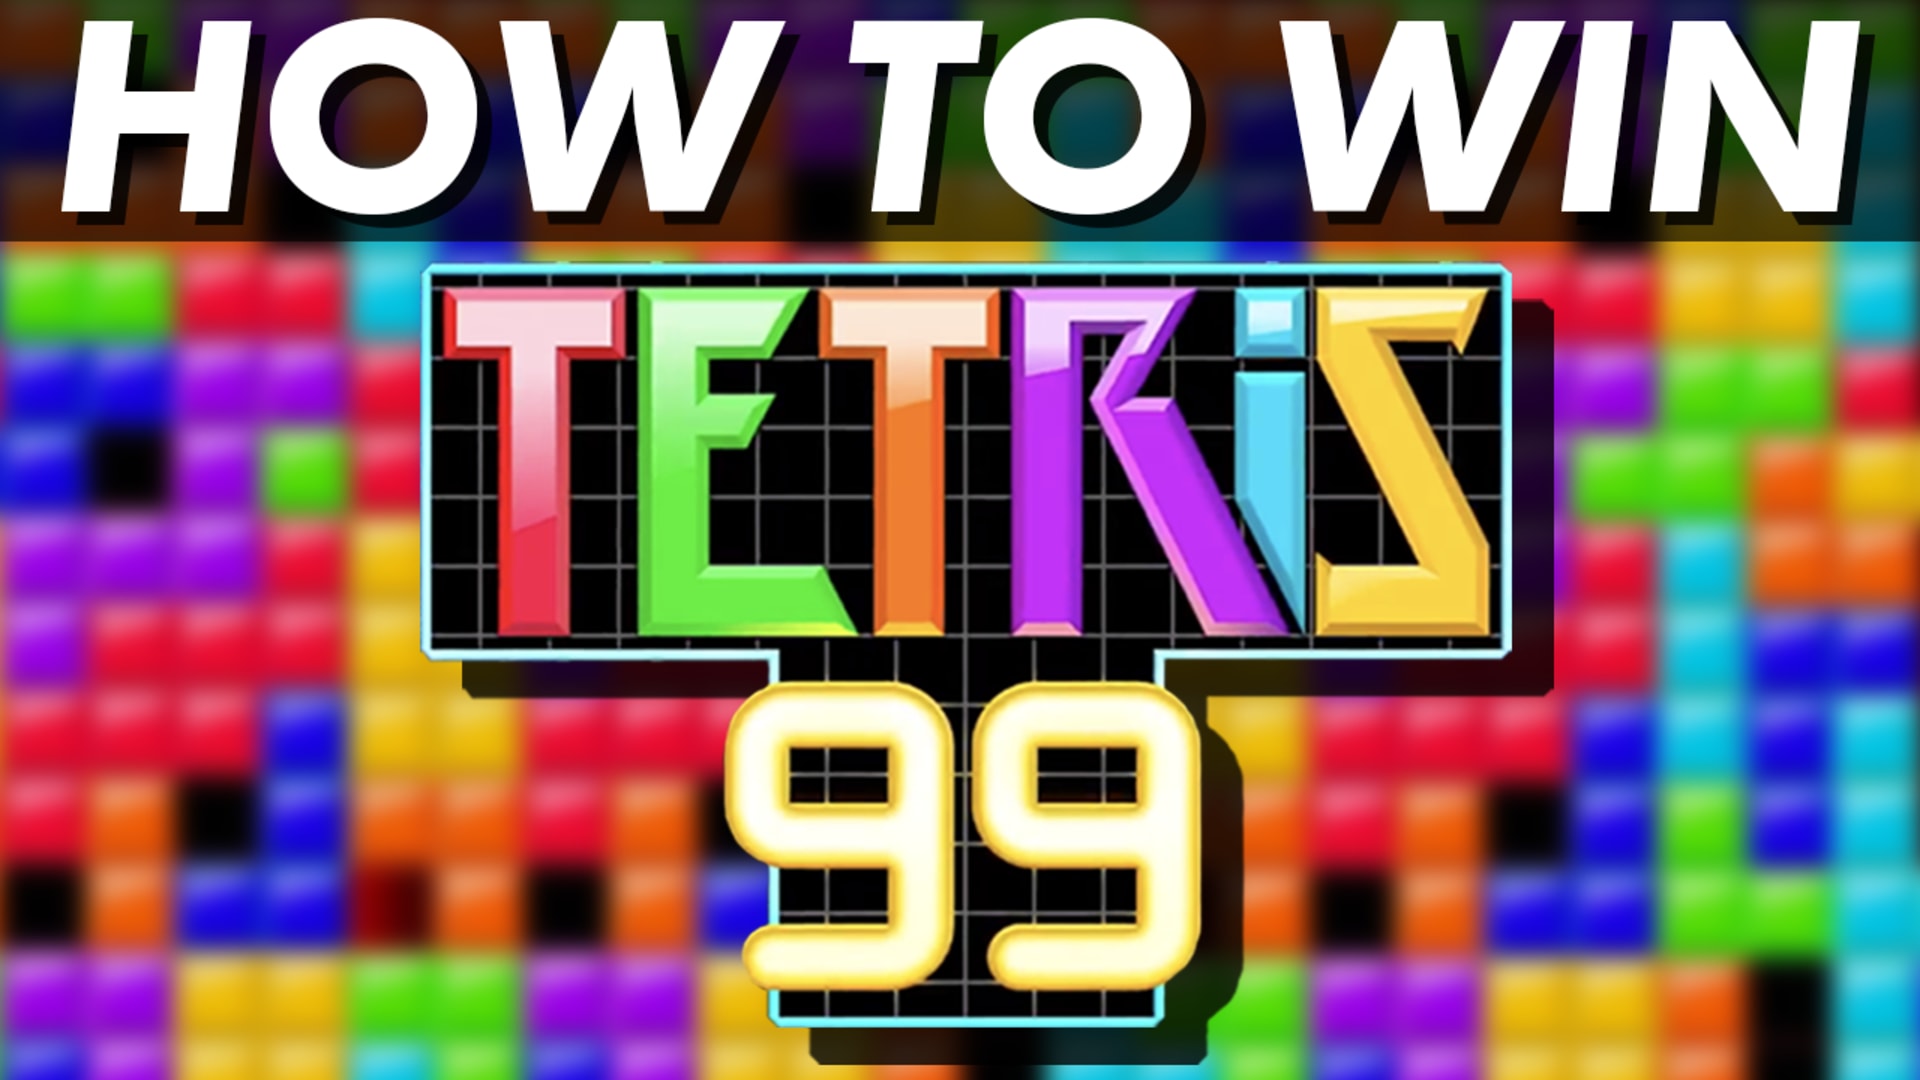 How to Win Tetris 99 - Rooster Teeth